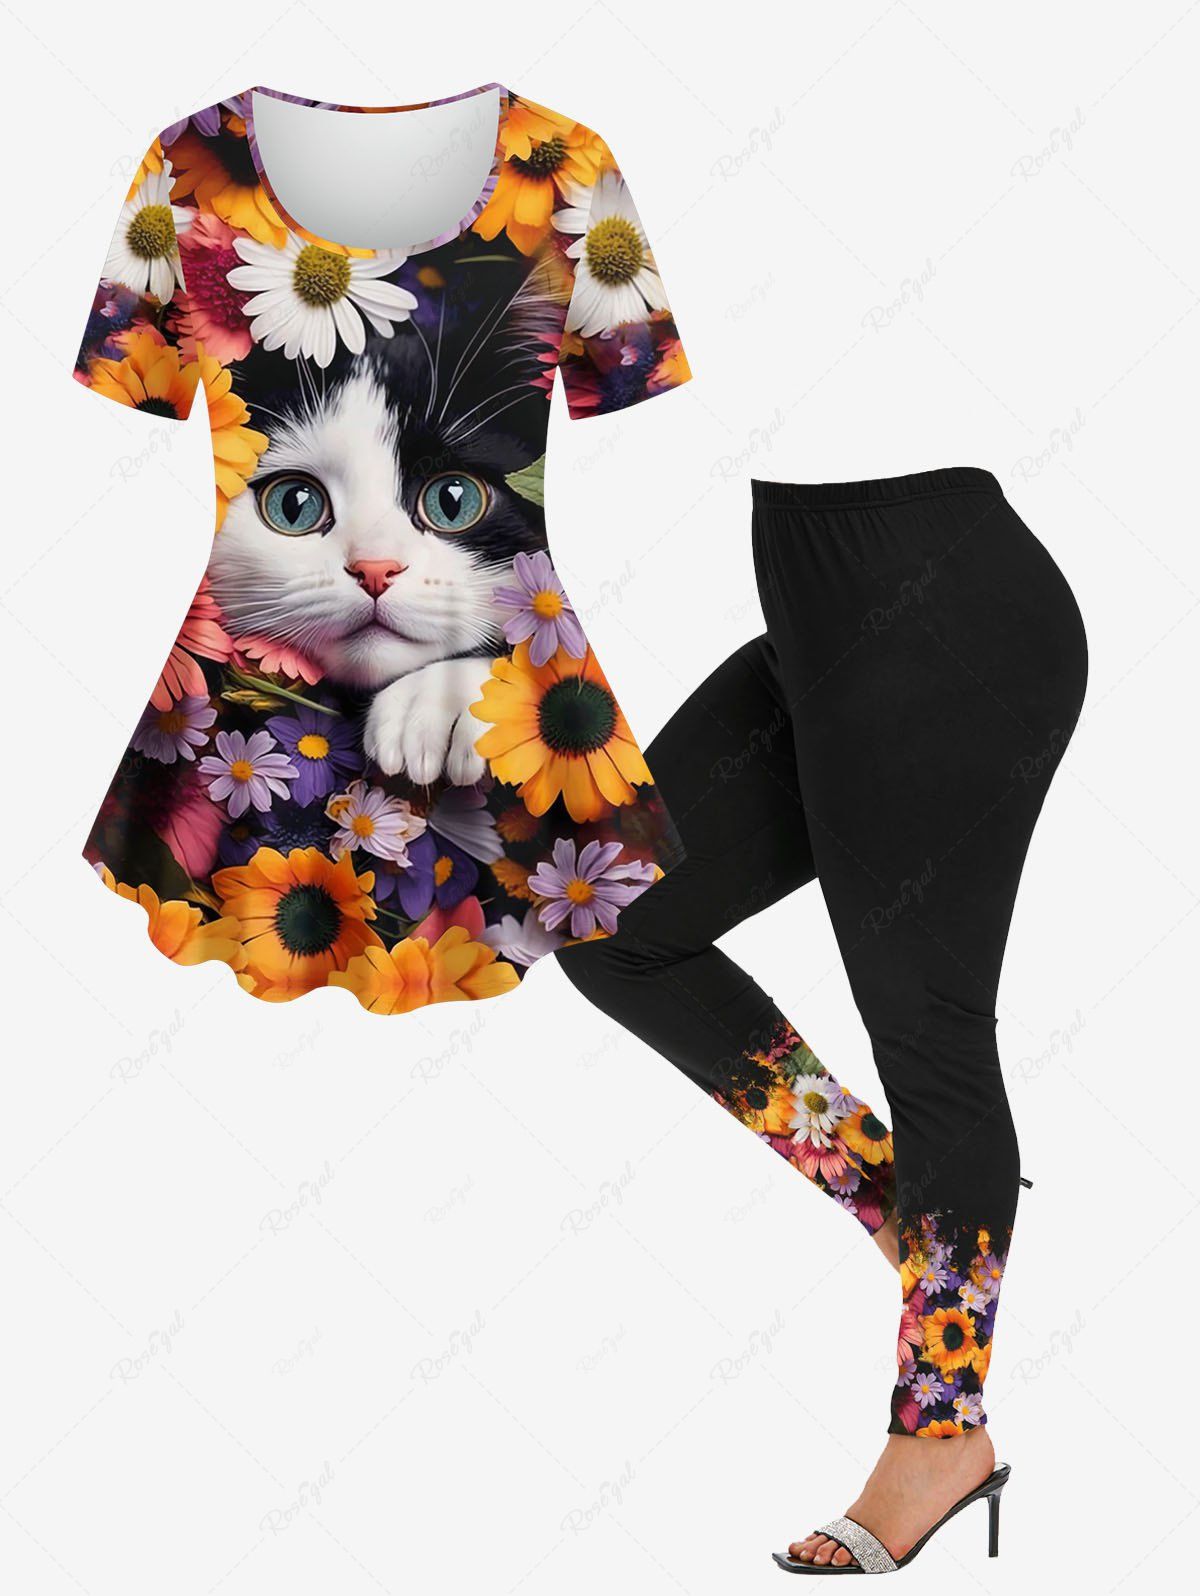 Fashion Colorful Sunflowers Cat Printed T-shirt and Colorful Sunflower Printed Leggings Plus Size Matching Set  